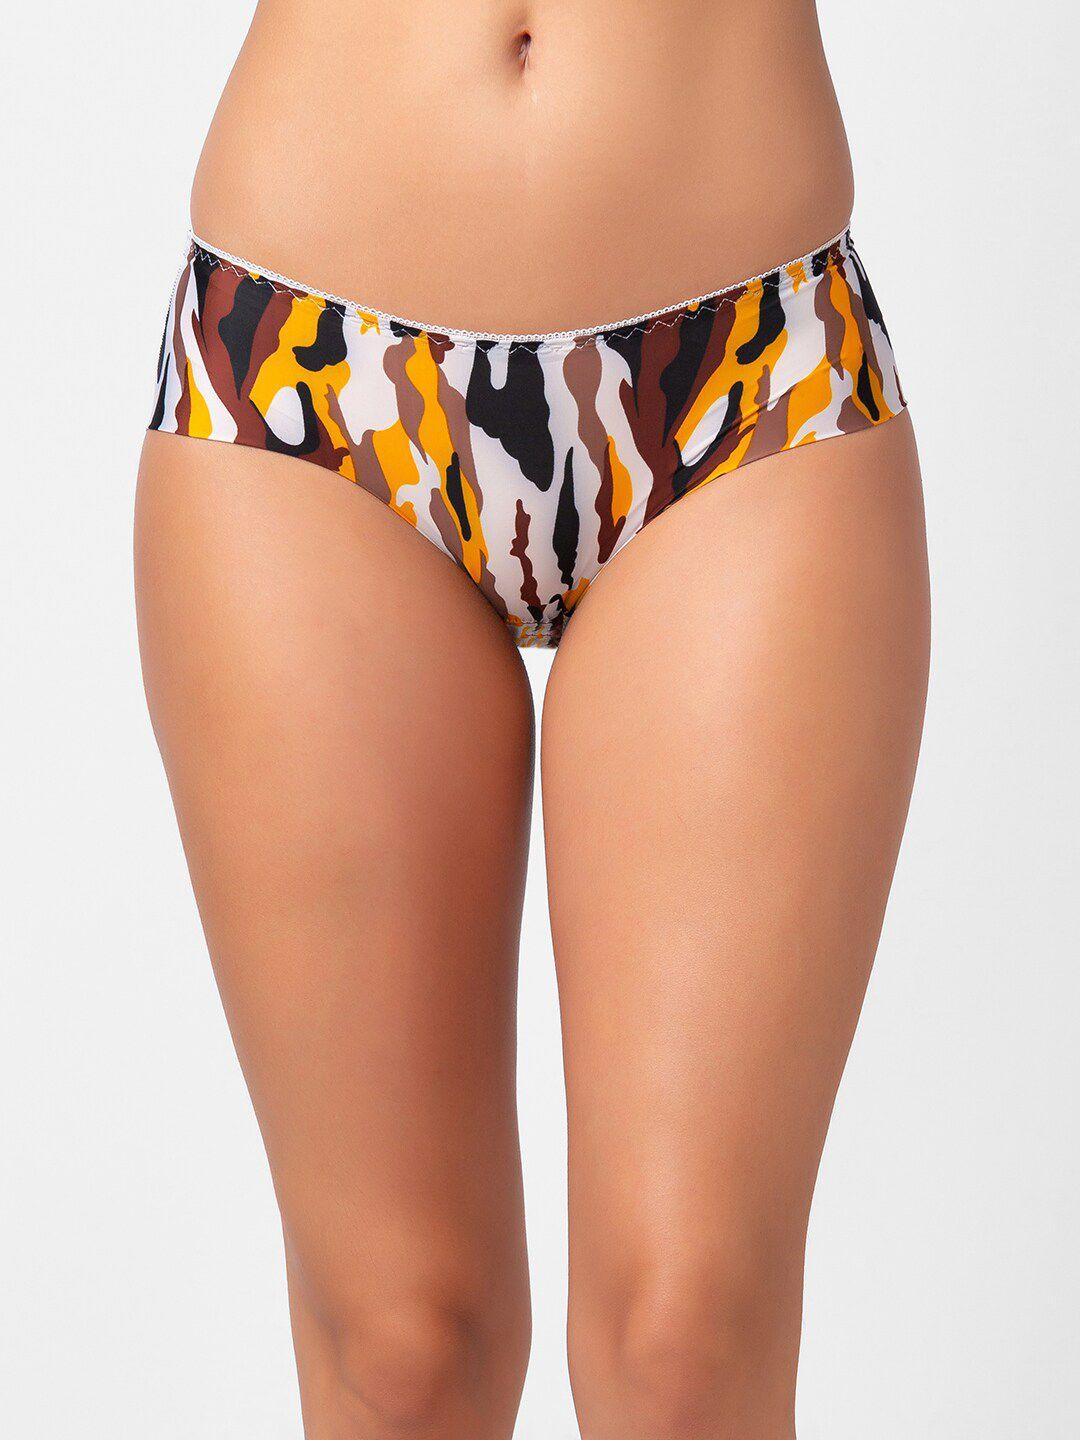 fashionrack abstract printed hipster briefs